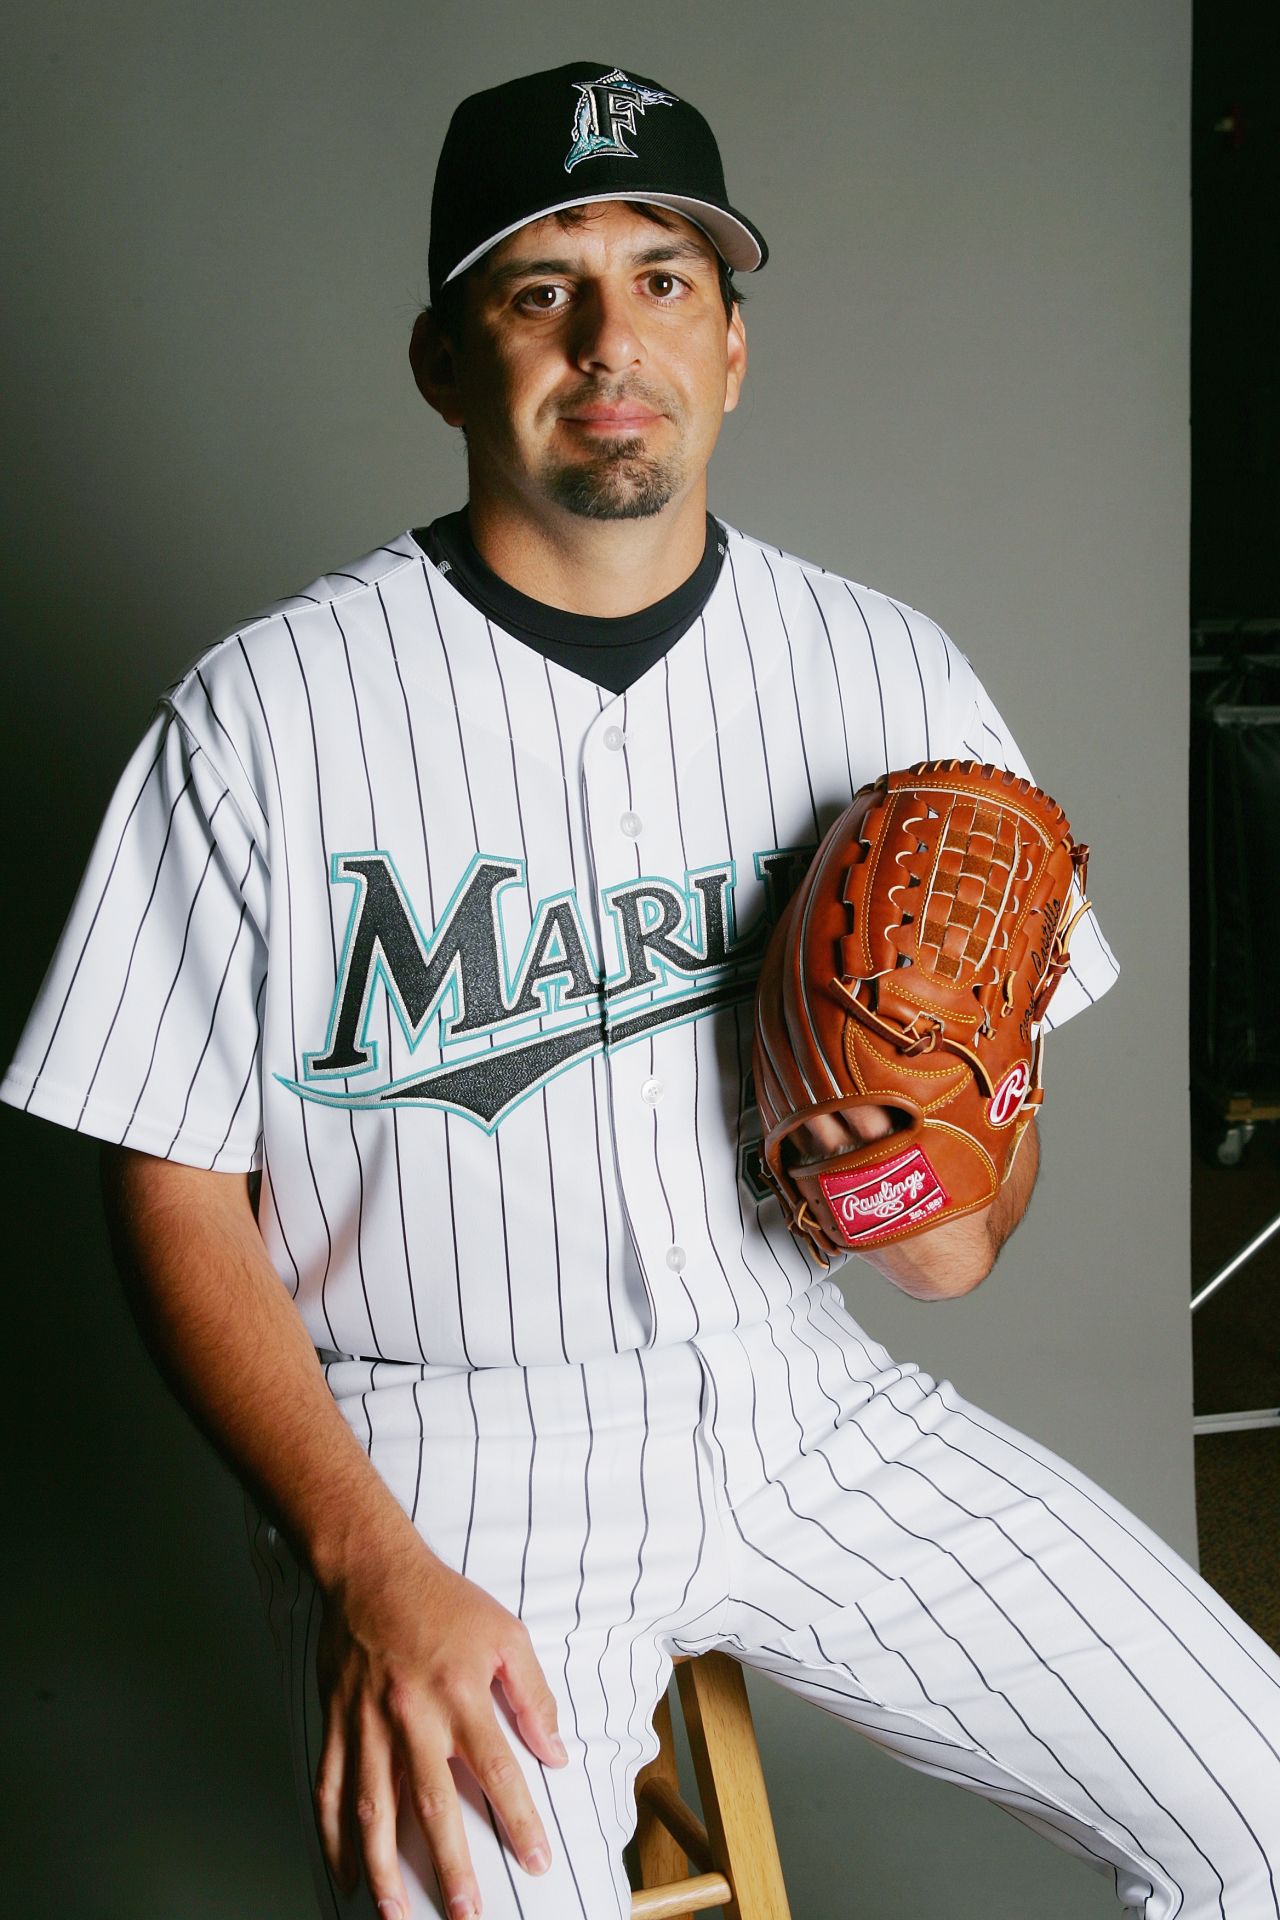 Former Major League Baseball <a href="http://edition.cnn.com/2013/07/30/sport/former-mlb-player-dead/">pitcher Frank Castillo </a>drowned while swimming in a lake near Phoenix, authorities said July 29. He was 44.